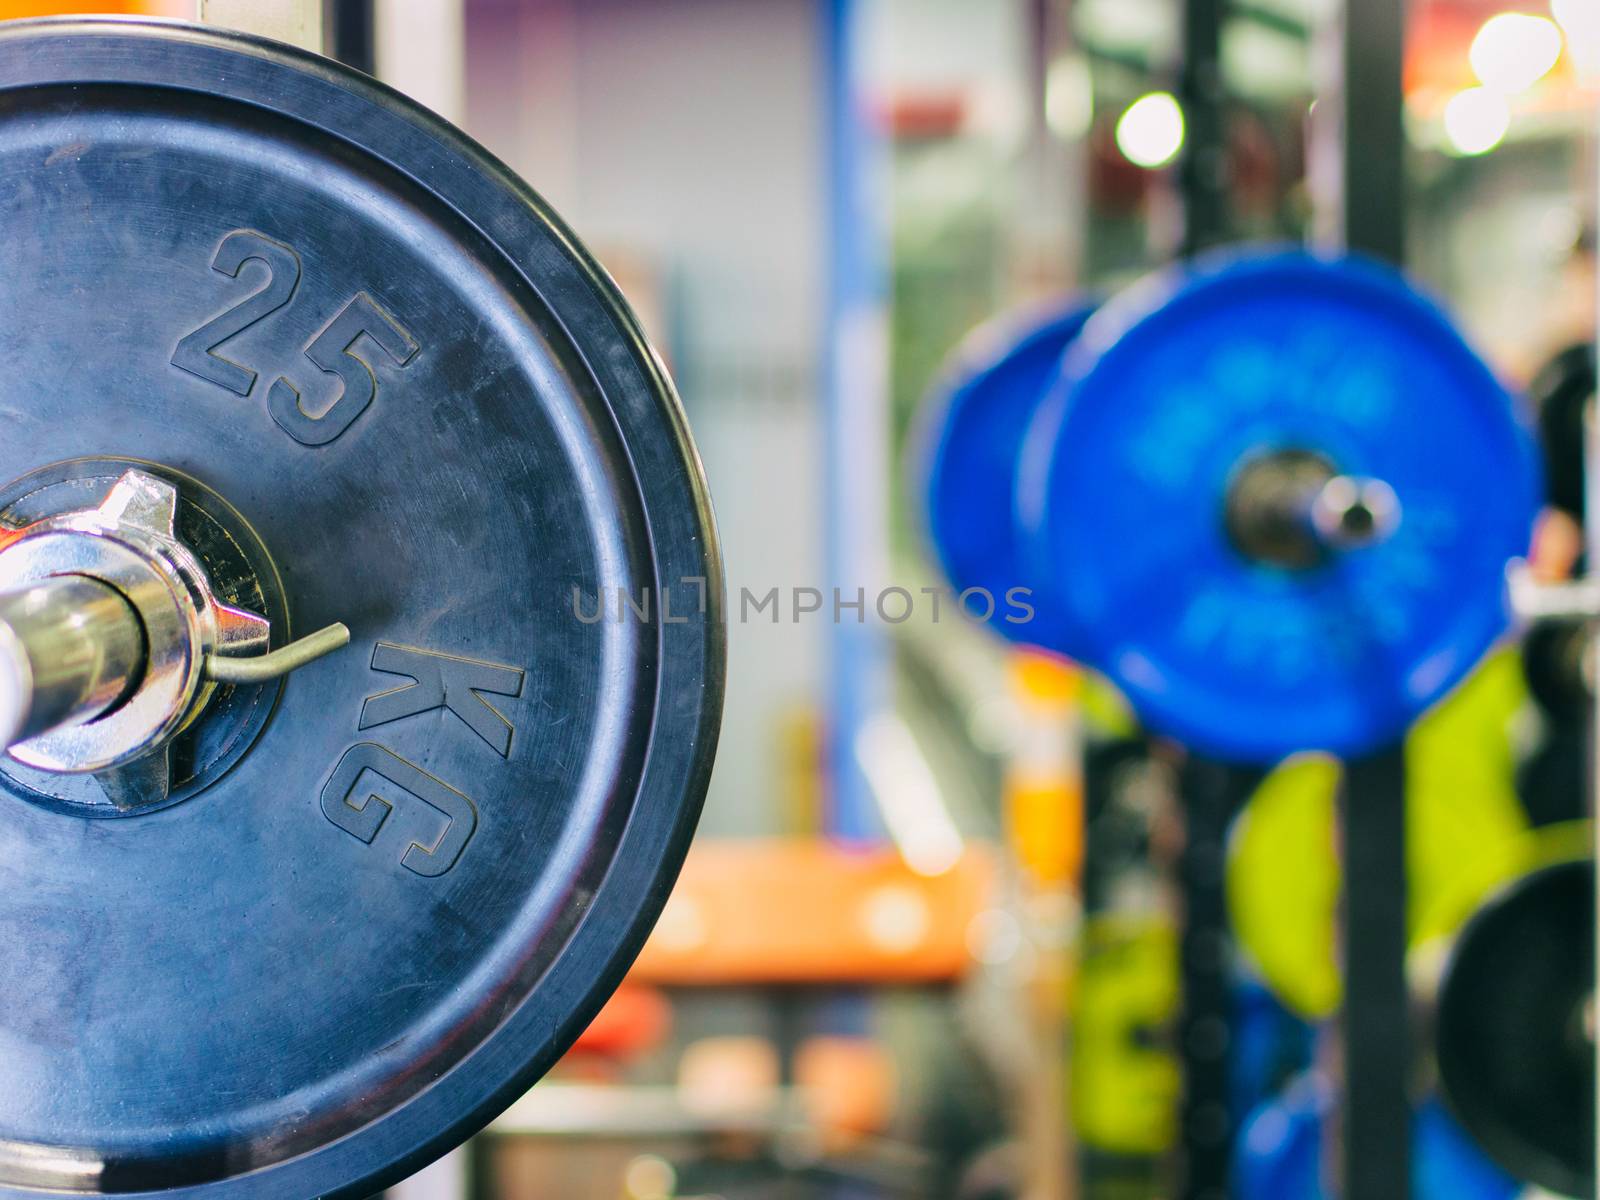 Barbell ready to workout in gym. Shallow DOF. Copy space. Sport or powerlifting background.